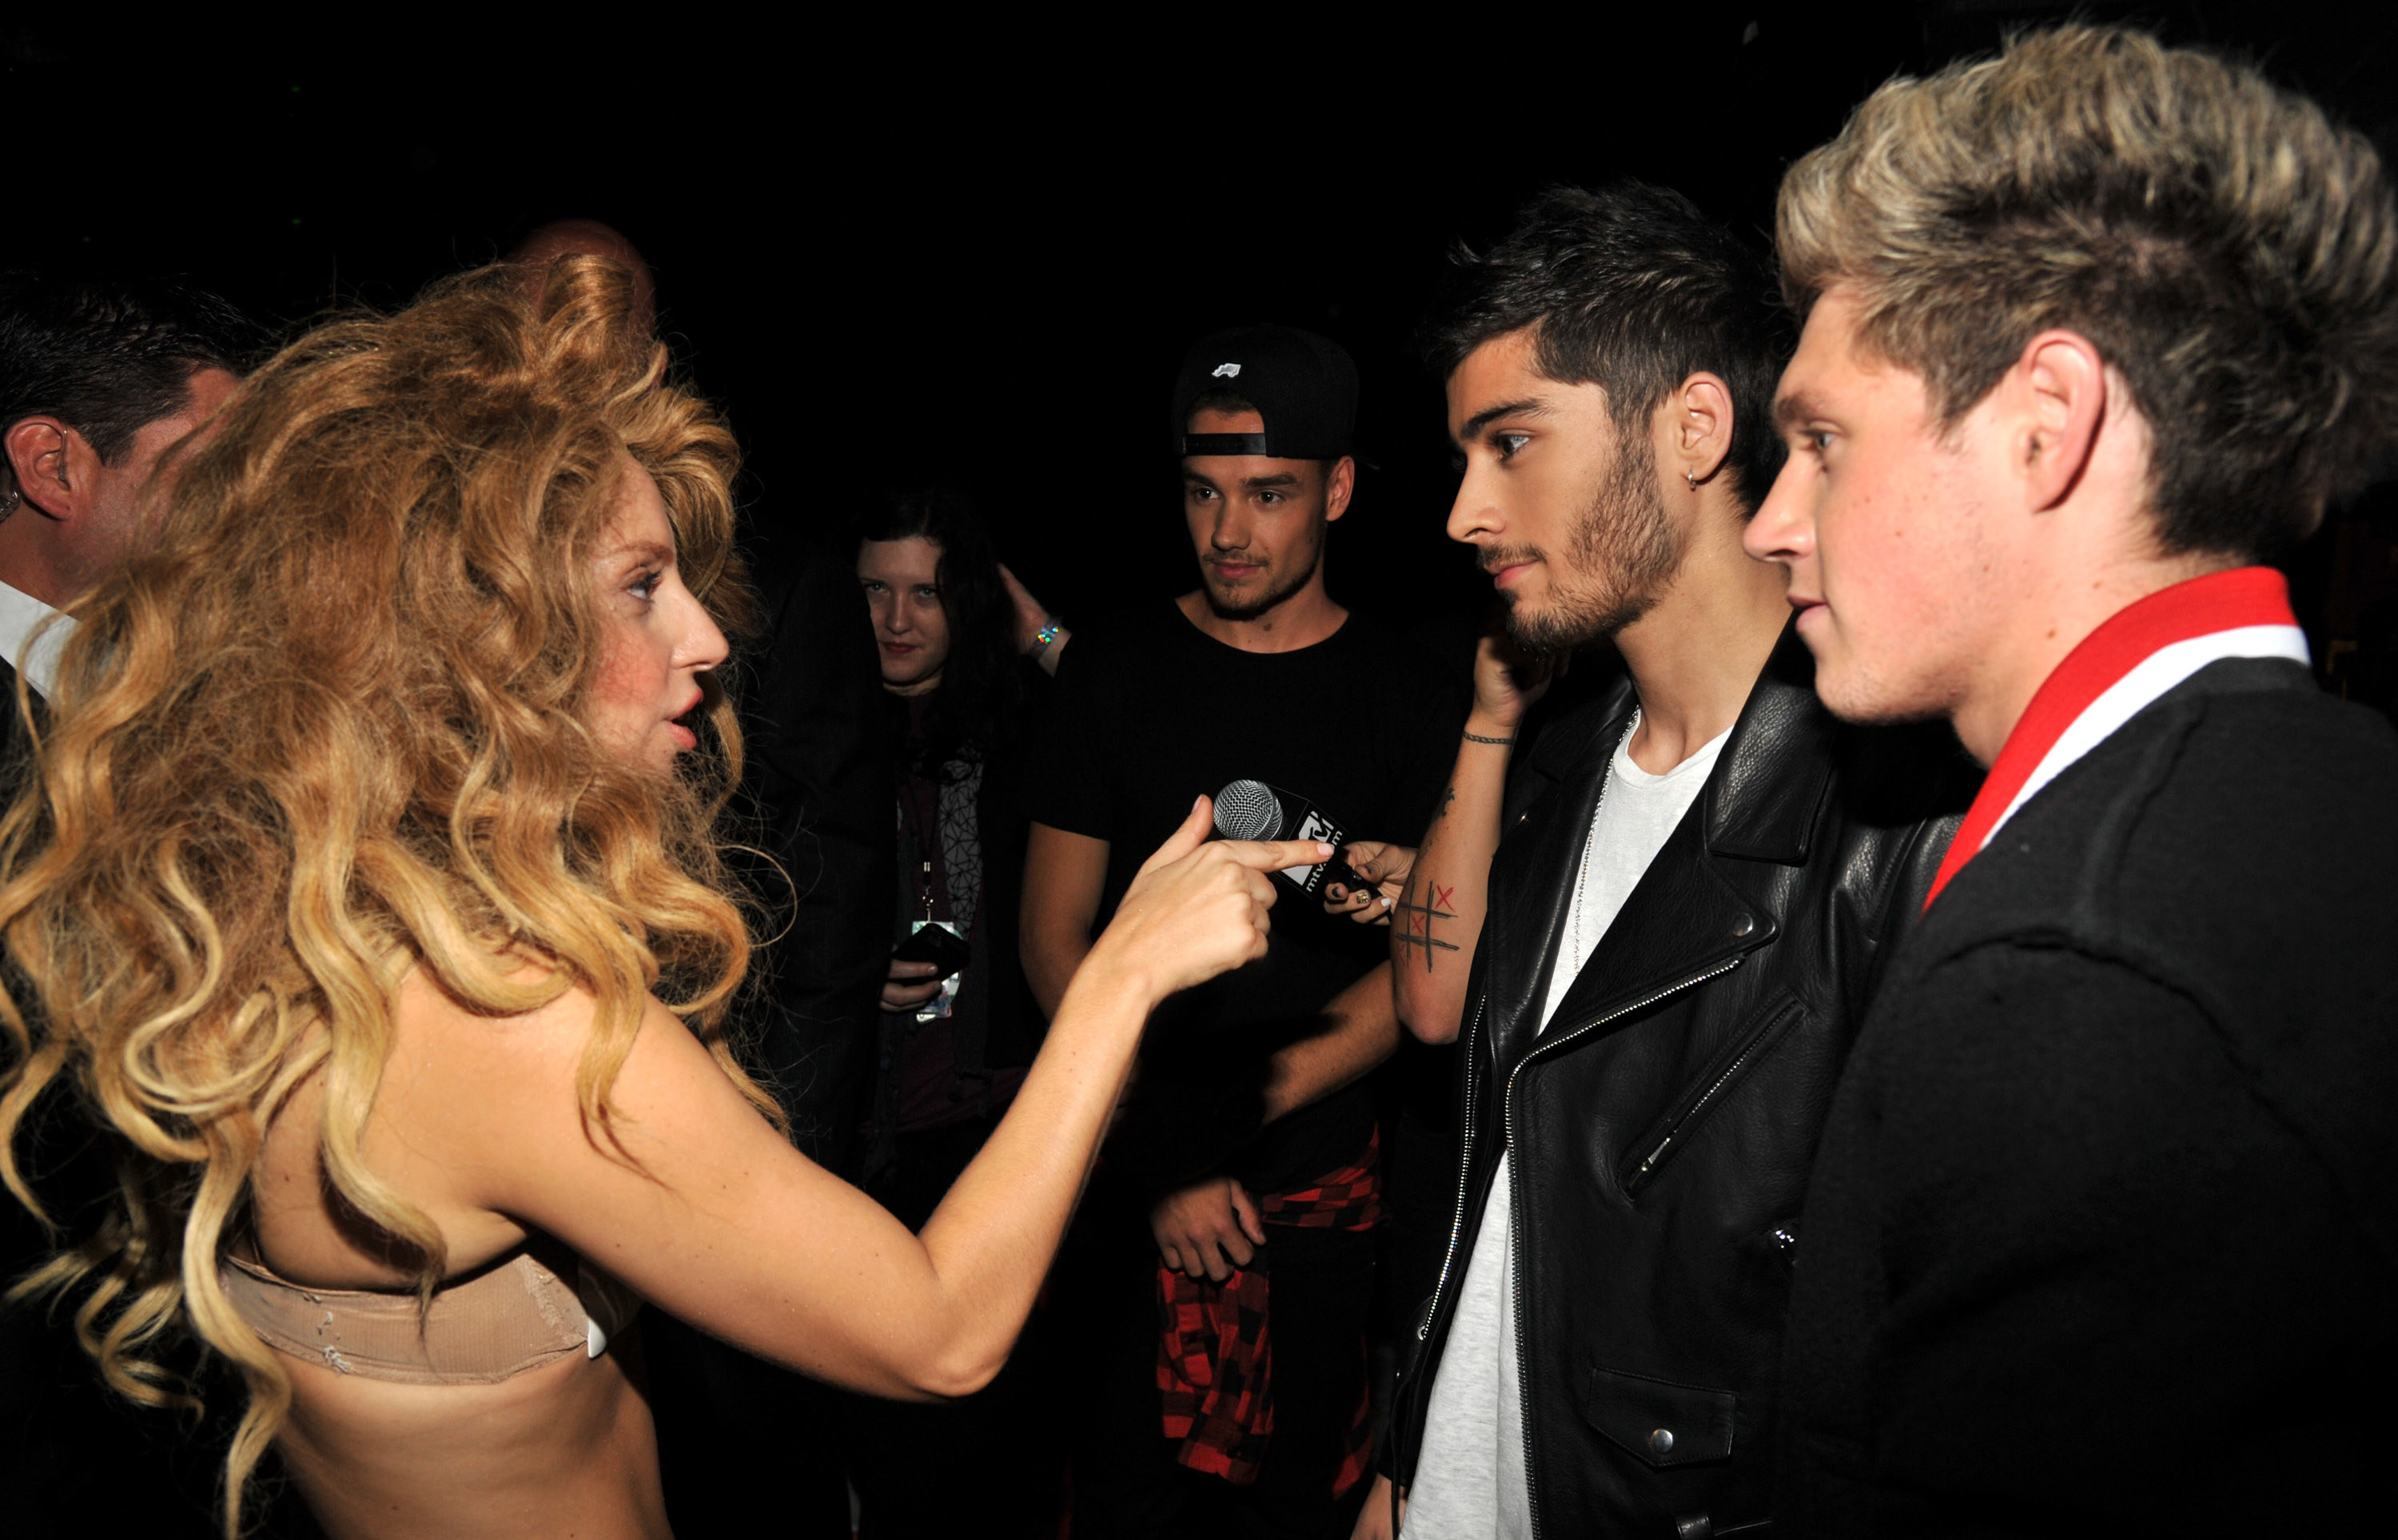 Lady Gaga talking to the One Direction group members